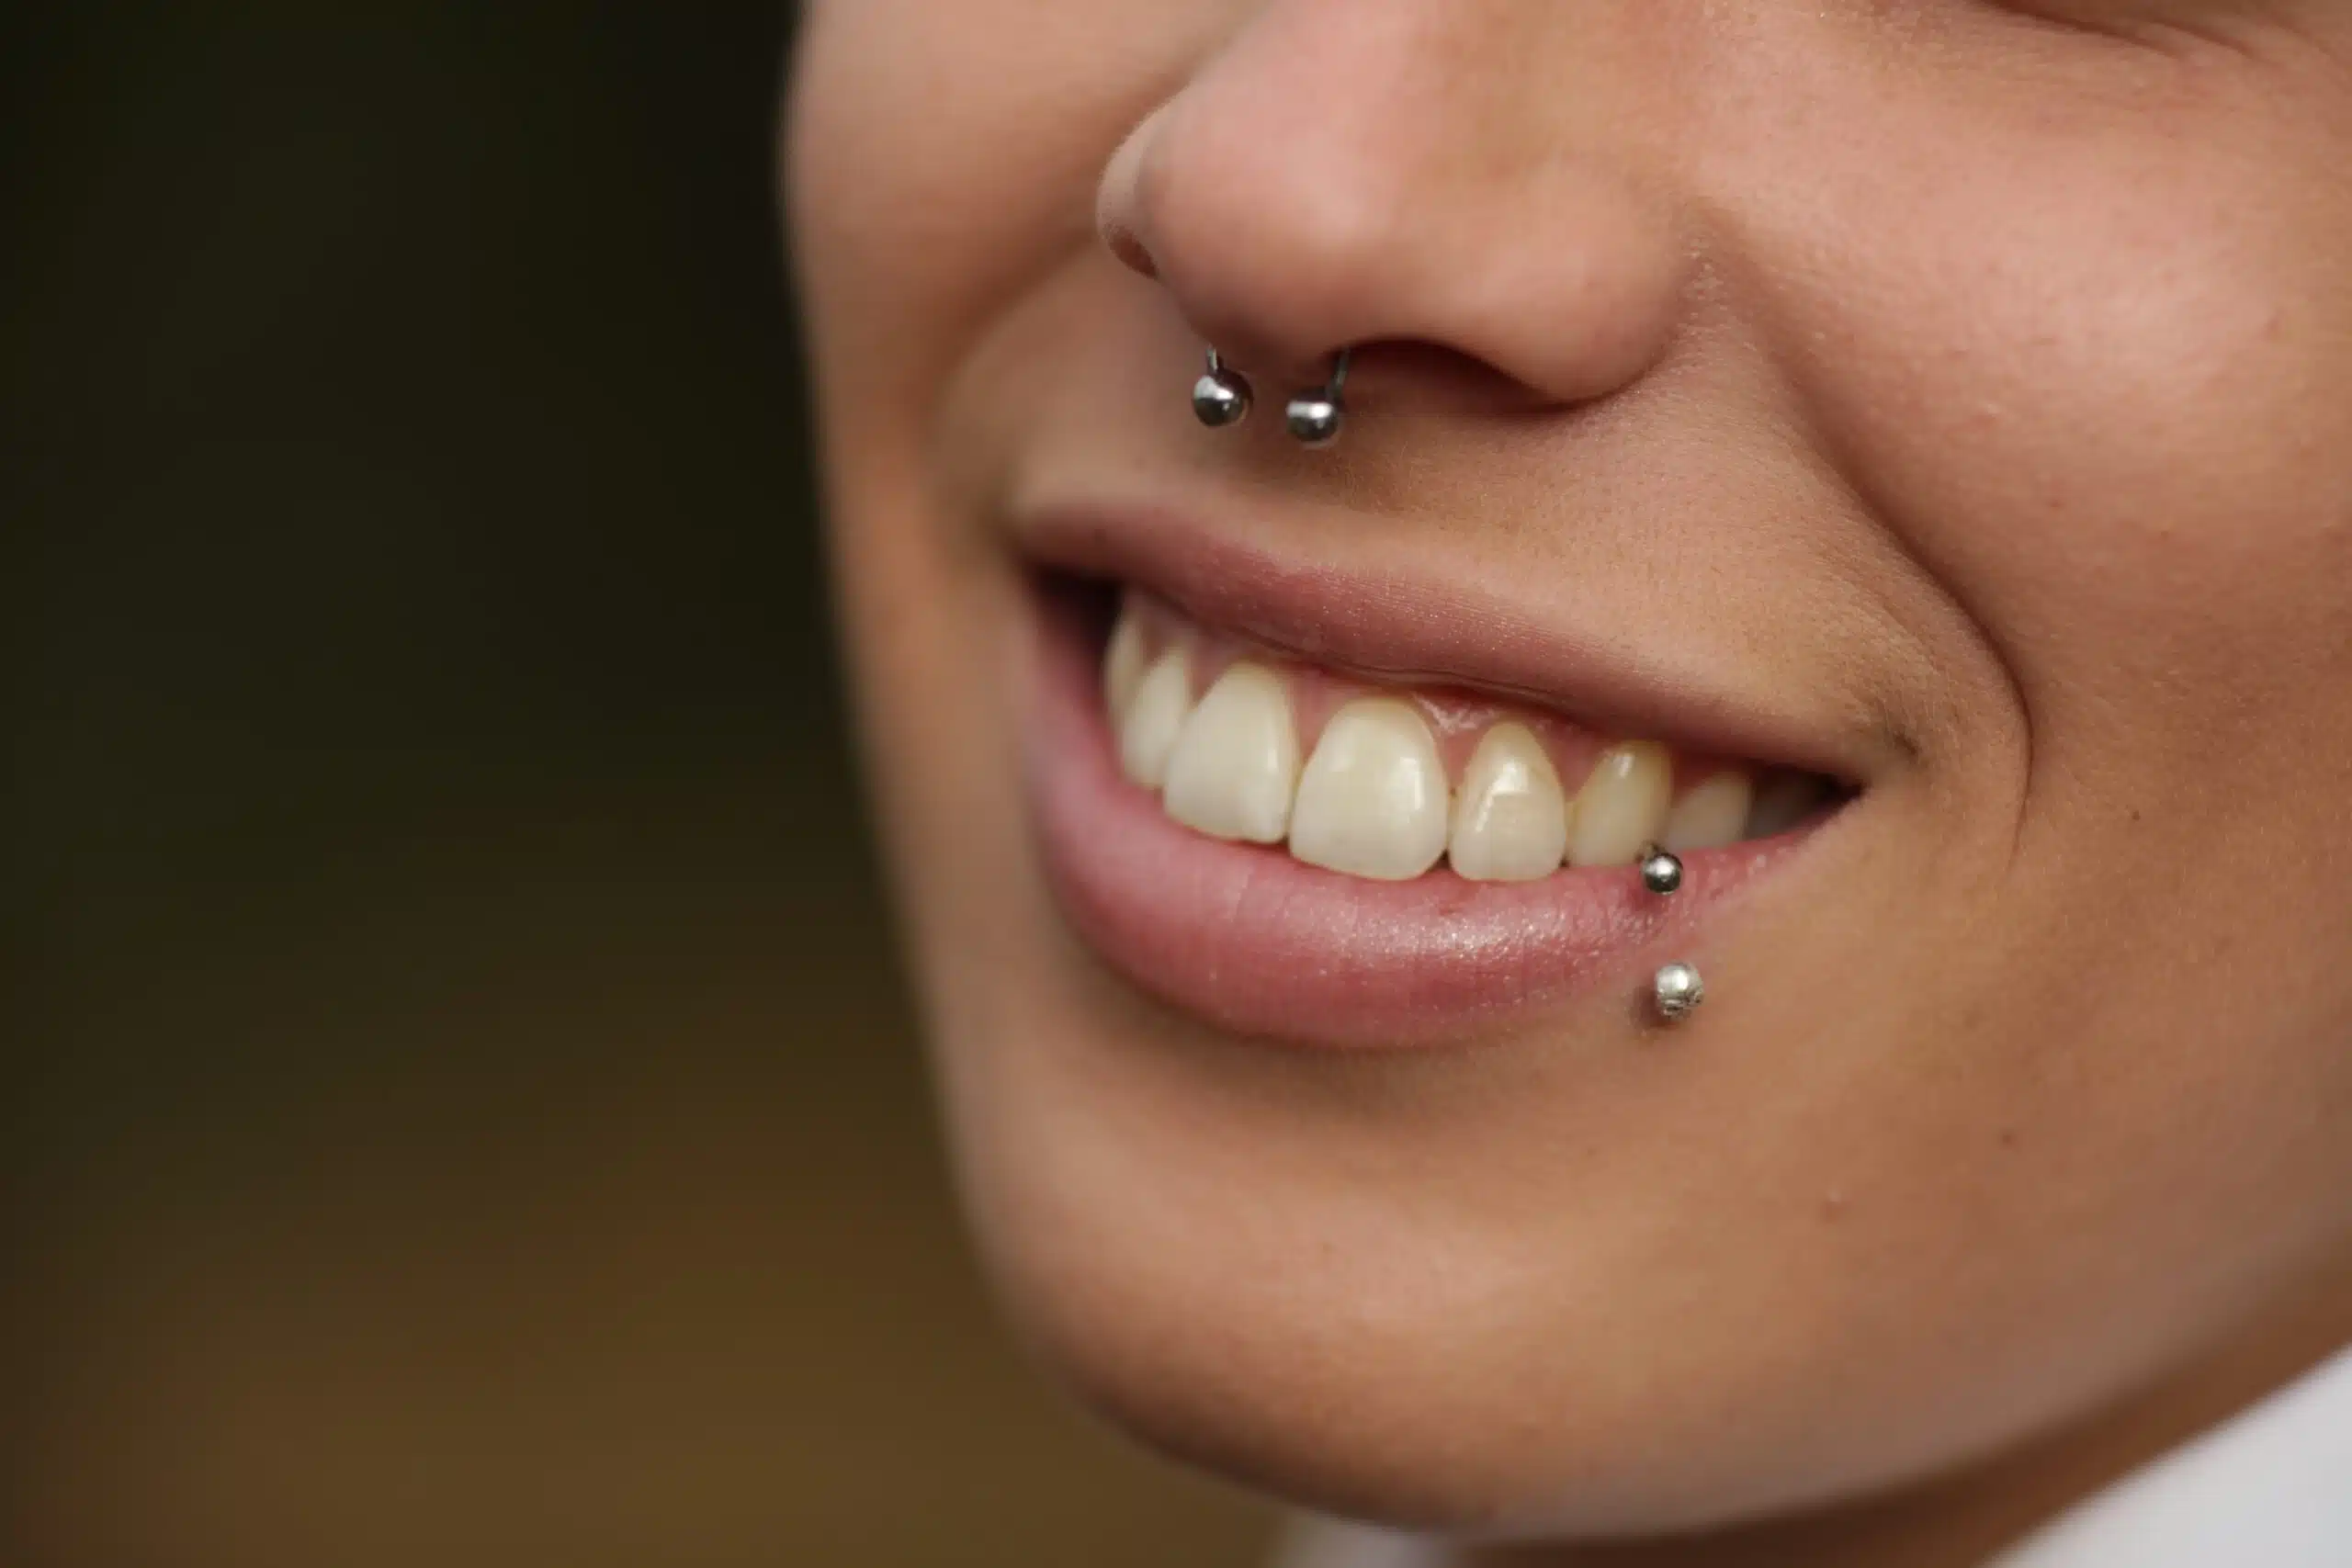 A smiling Black woman shown from the nose down with a septum piercing and lip ring.